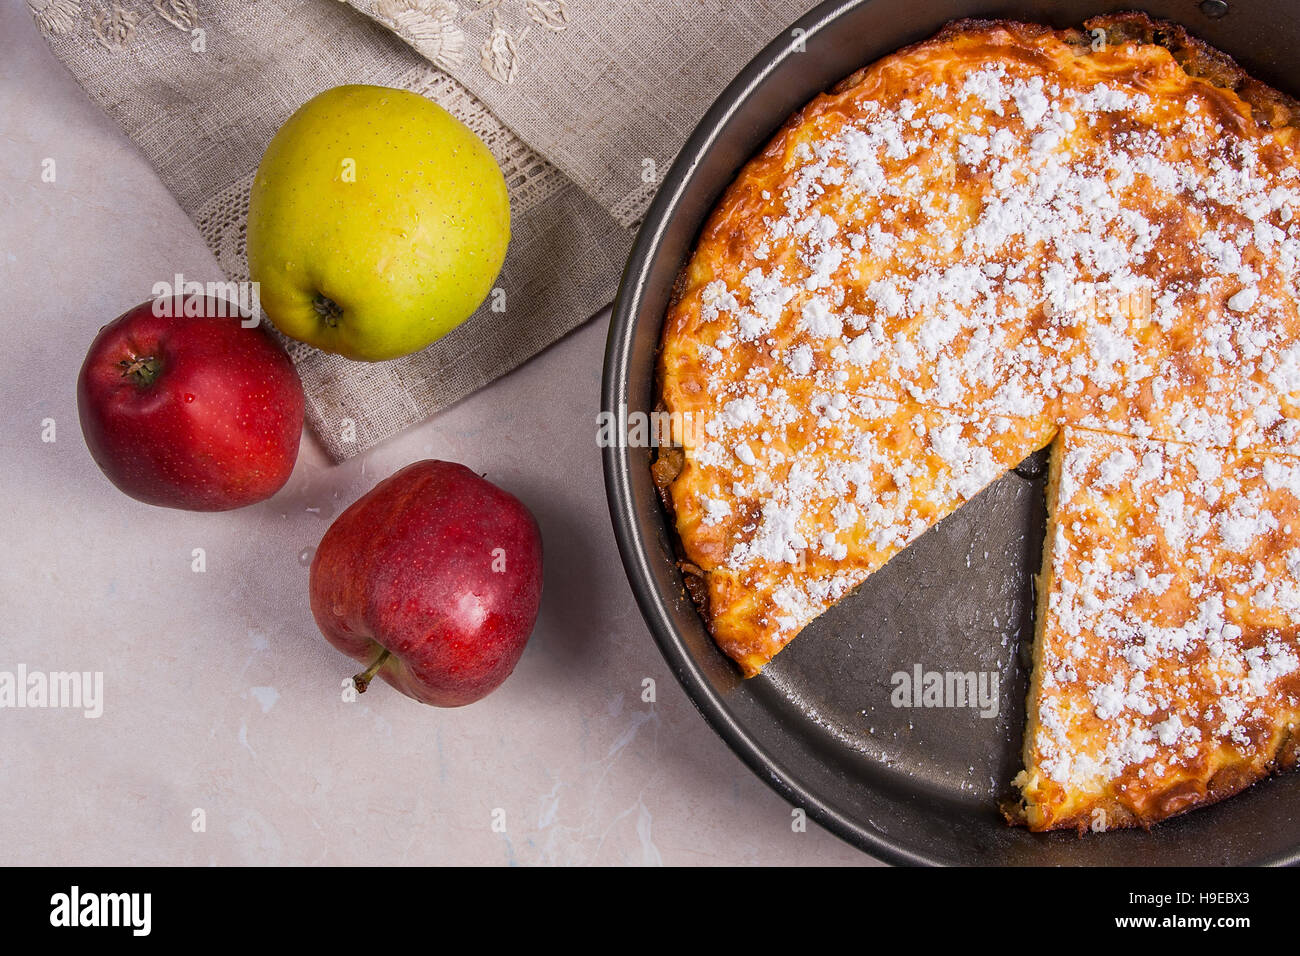 Homemade freshly baked apple pie with apples. Dessert ready to eat. Several organic red and green apples in the background. Stock Photo